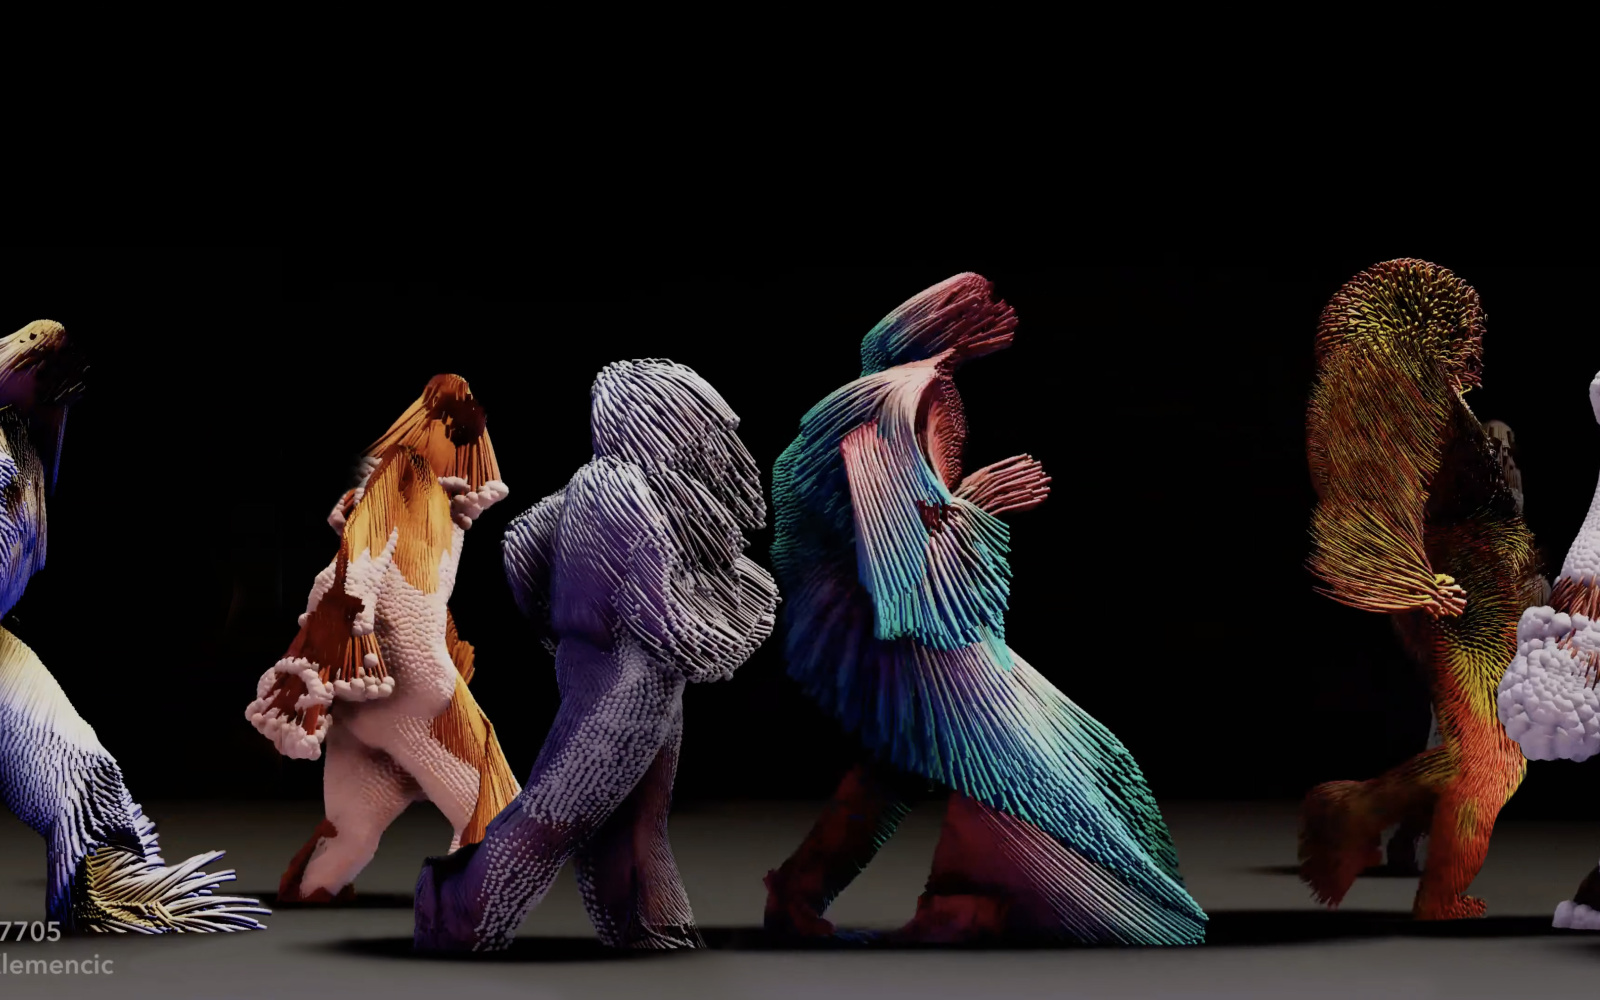 Human-like beings, made of colourful, fabric-like materials and fringes, walk in a row from left to right.